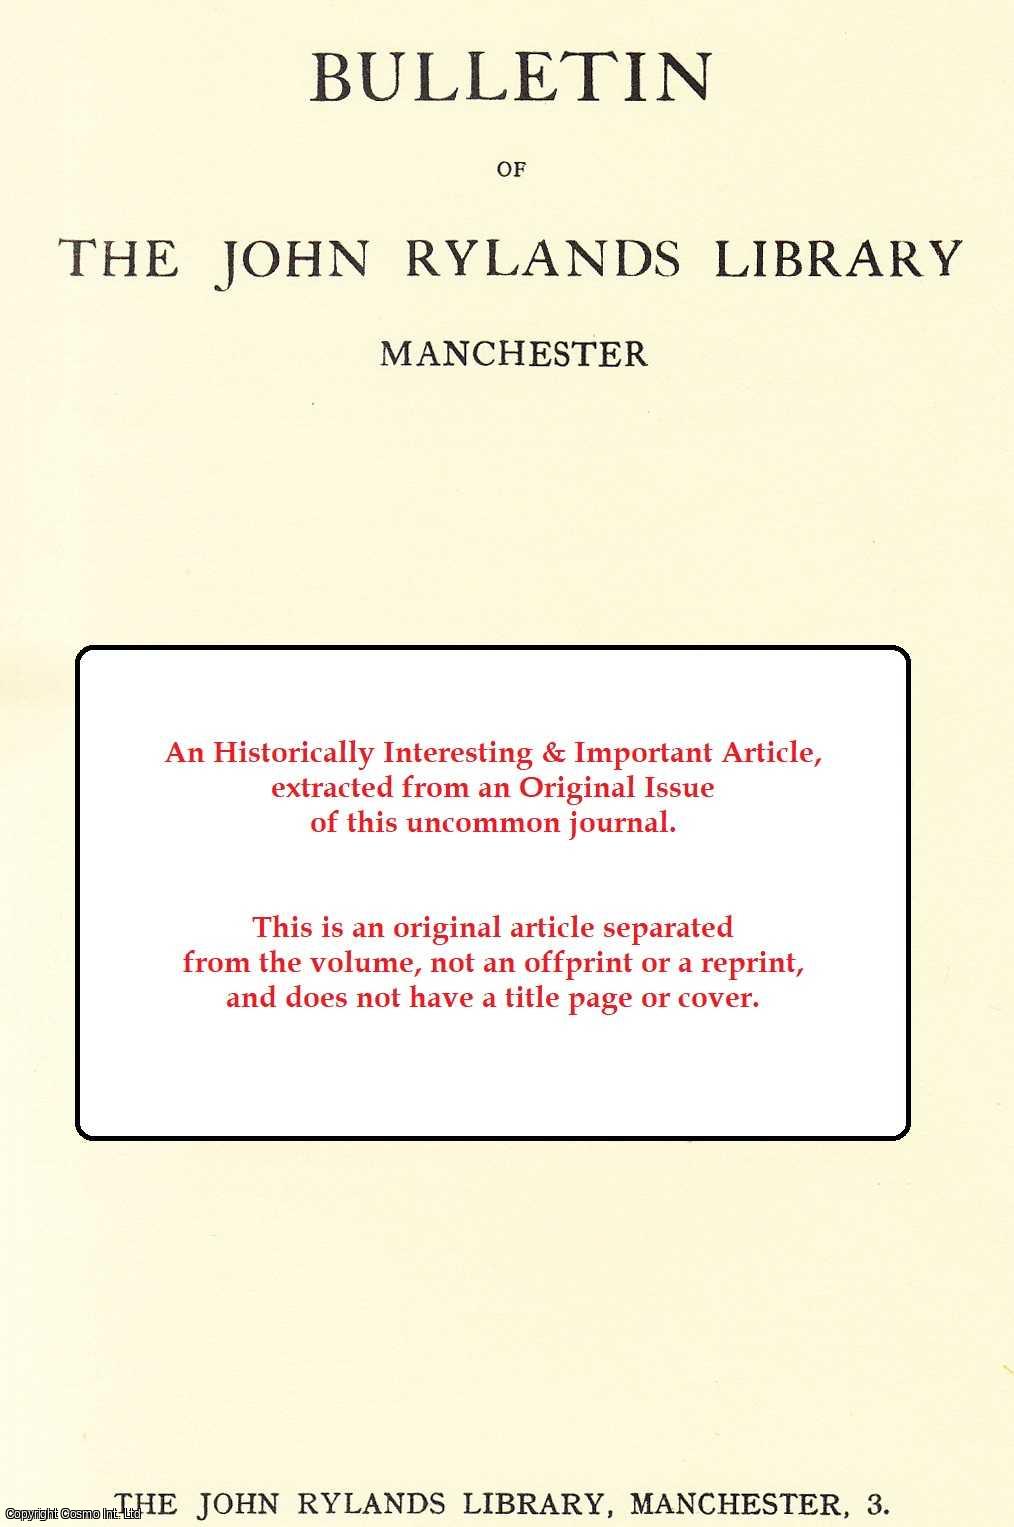 Edward Carney - Computers Literacy and the English Writing System. An original article from the Bulletin of the John Rylands Library Manchester; from the Issue, Computers and the Humanities, 1992.